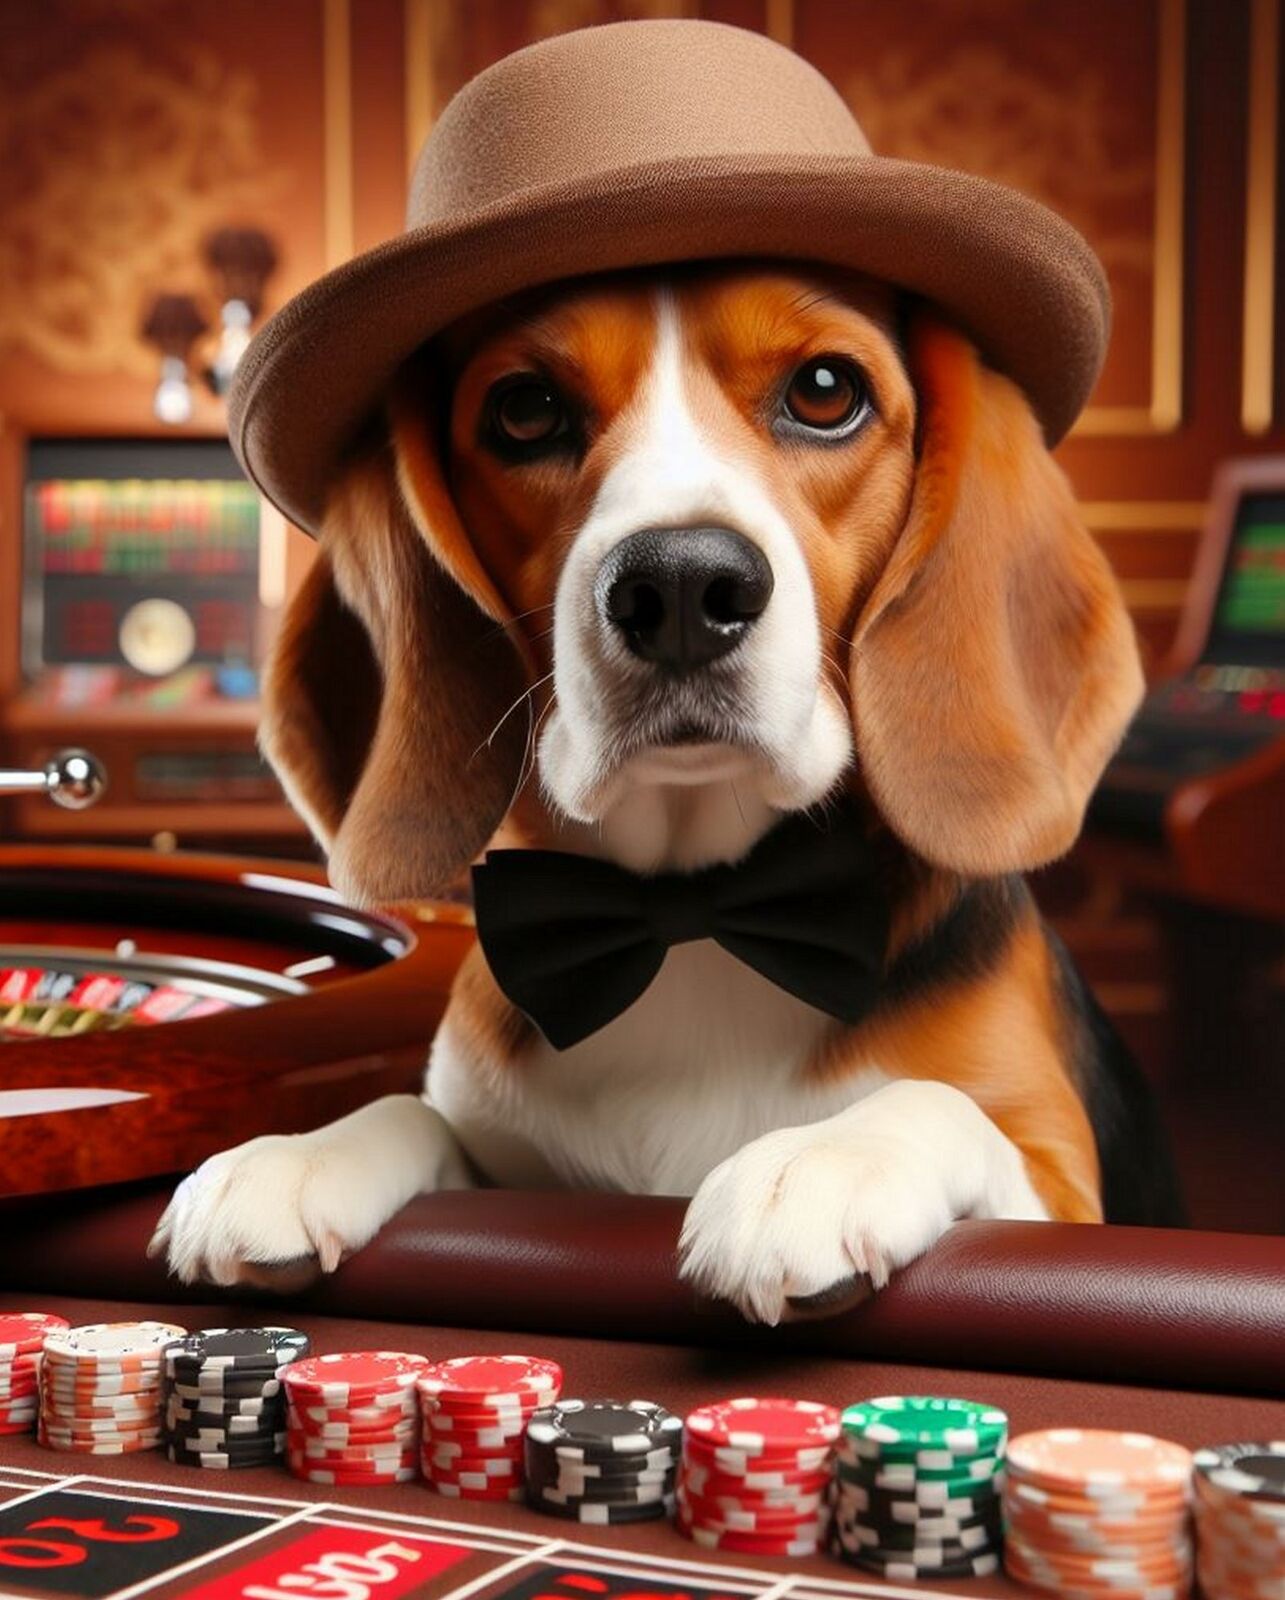 BEAGLE PLAYING AT ROULETTE TABLE FANTASY ART PRINT  (228-A)